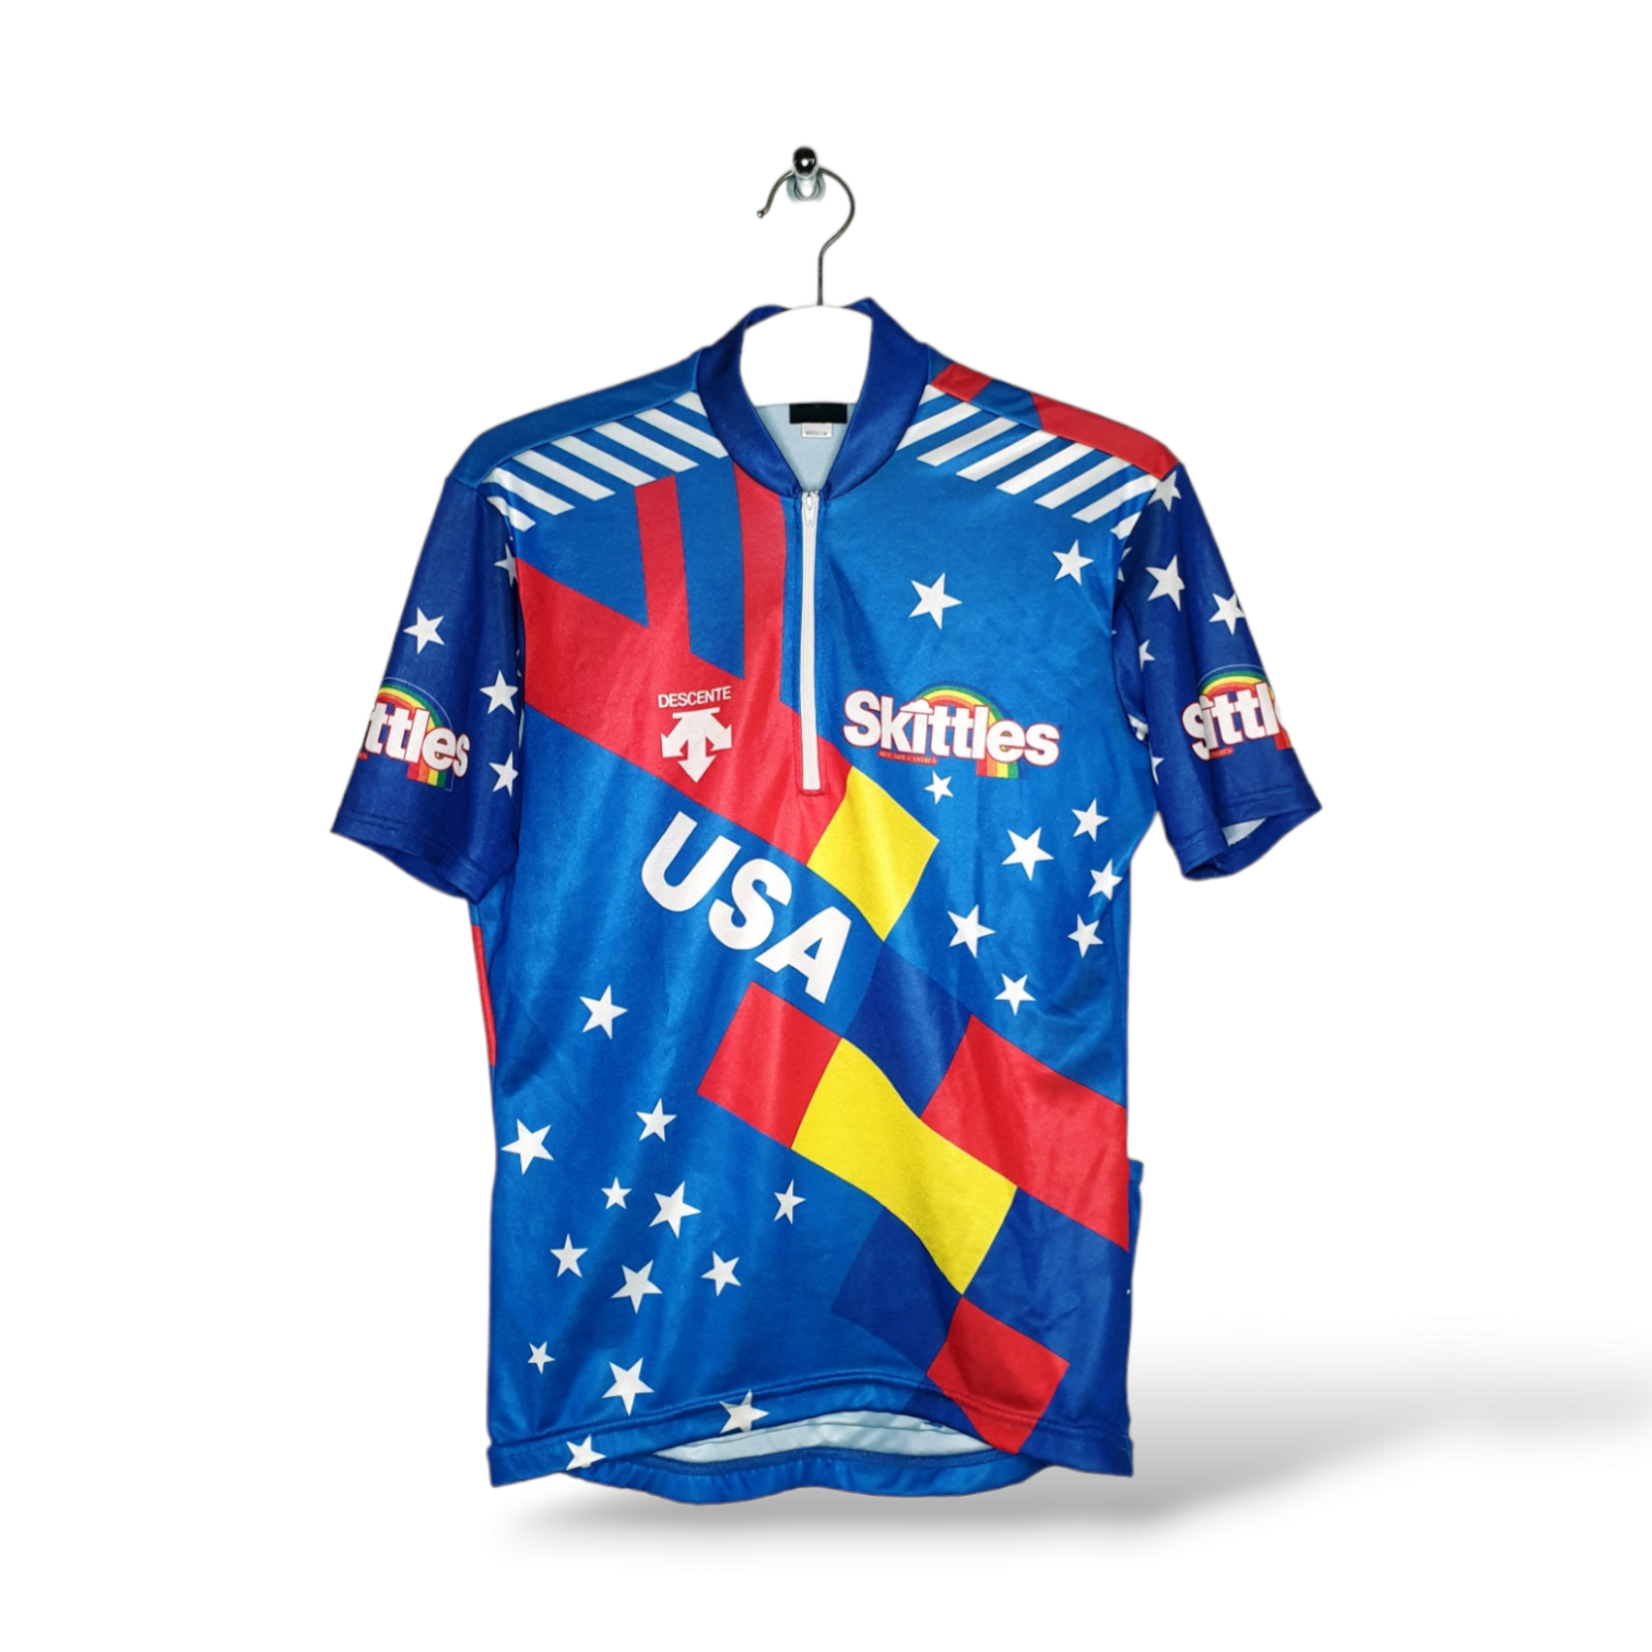 Descente vintage cycling jersey Team USA Skittles 90s - We Love Sports  Shirts